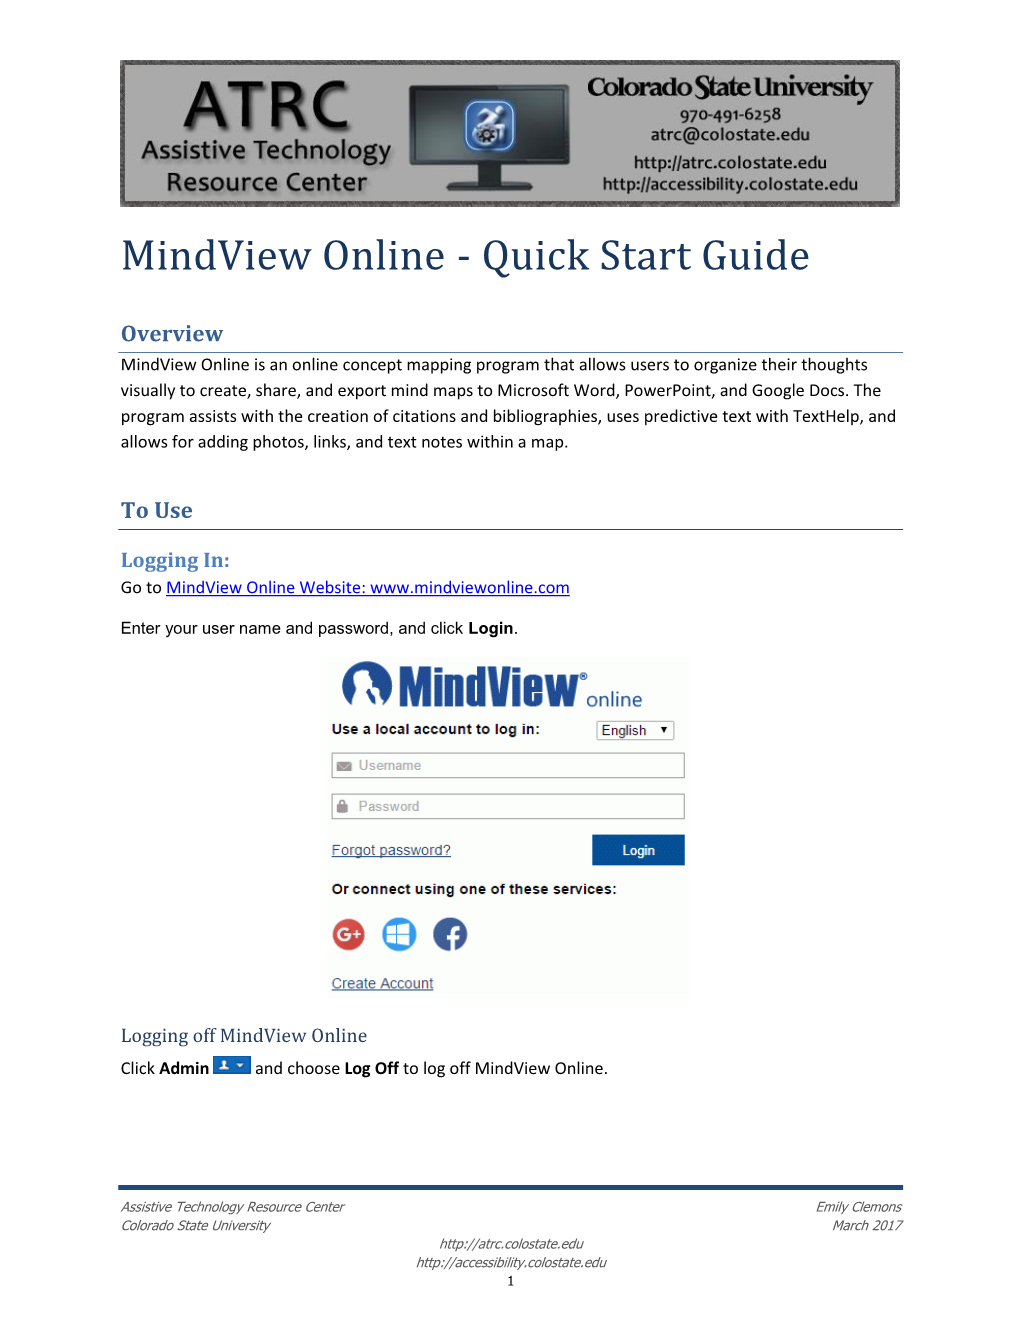 Mindview Online - Quick Start Guide